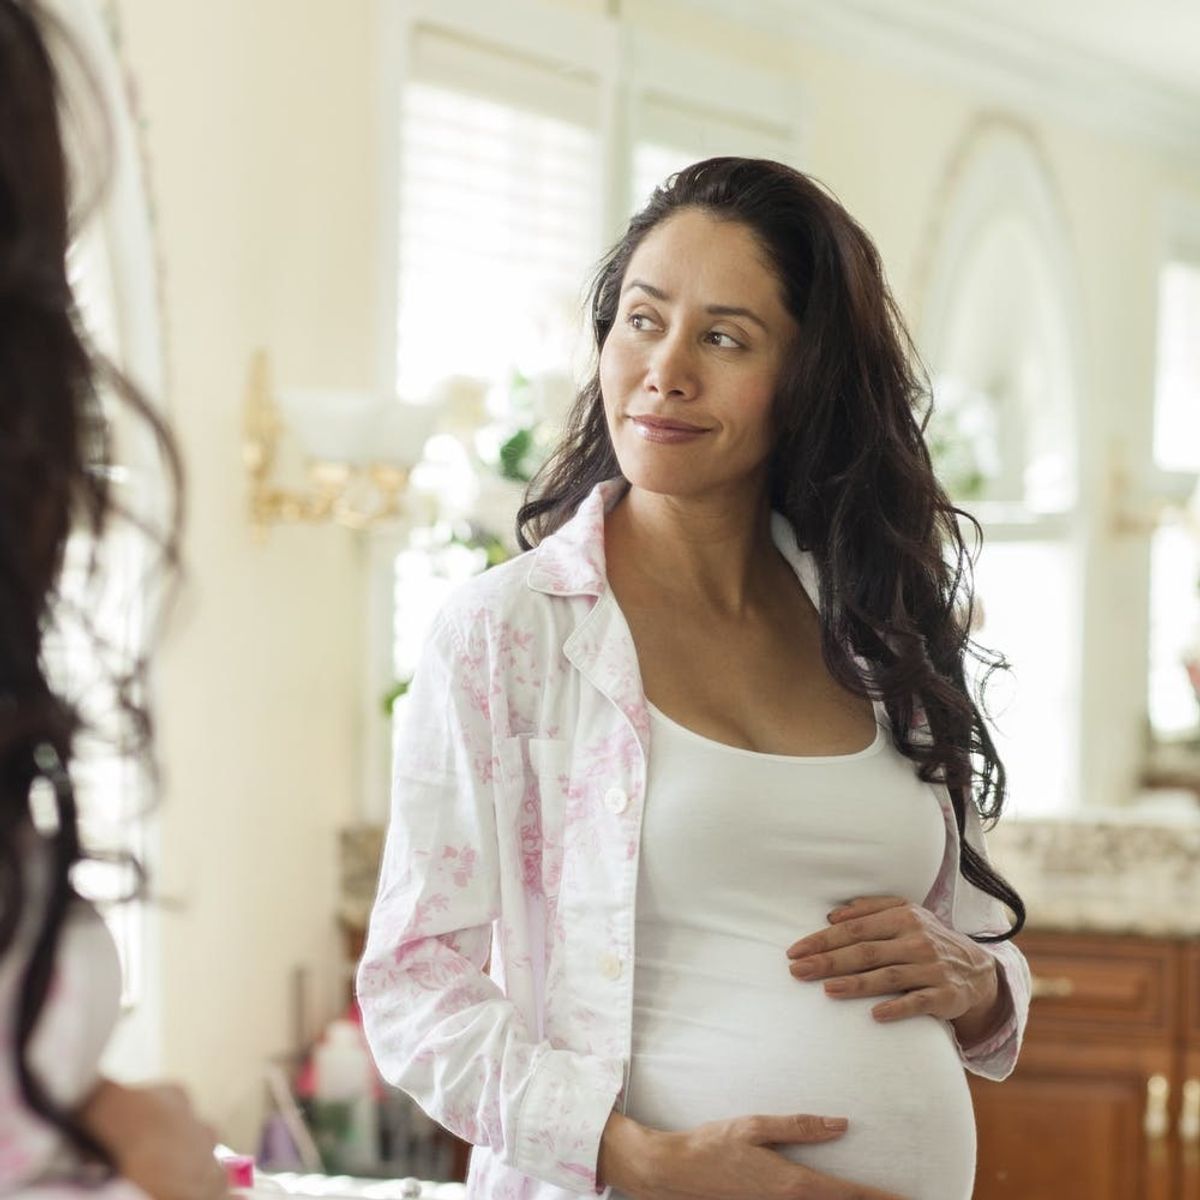 5 Pregnancy Body Fears That You Totally Don’t Need to Worry About